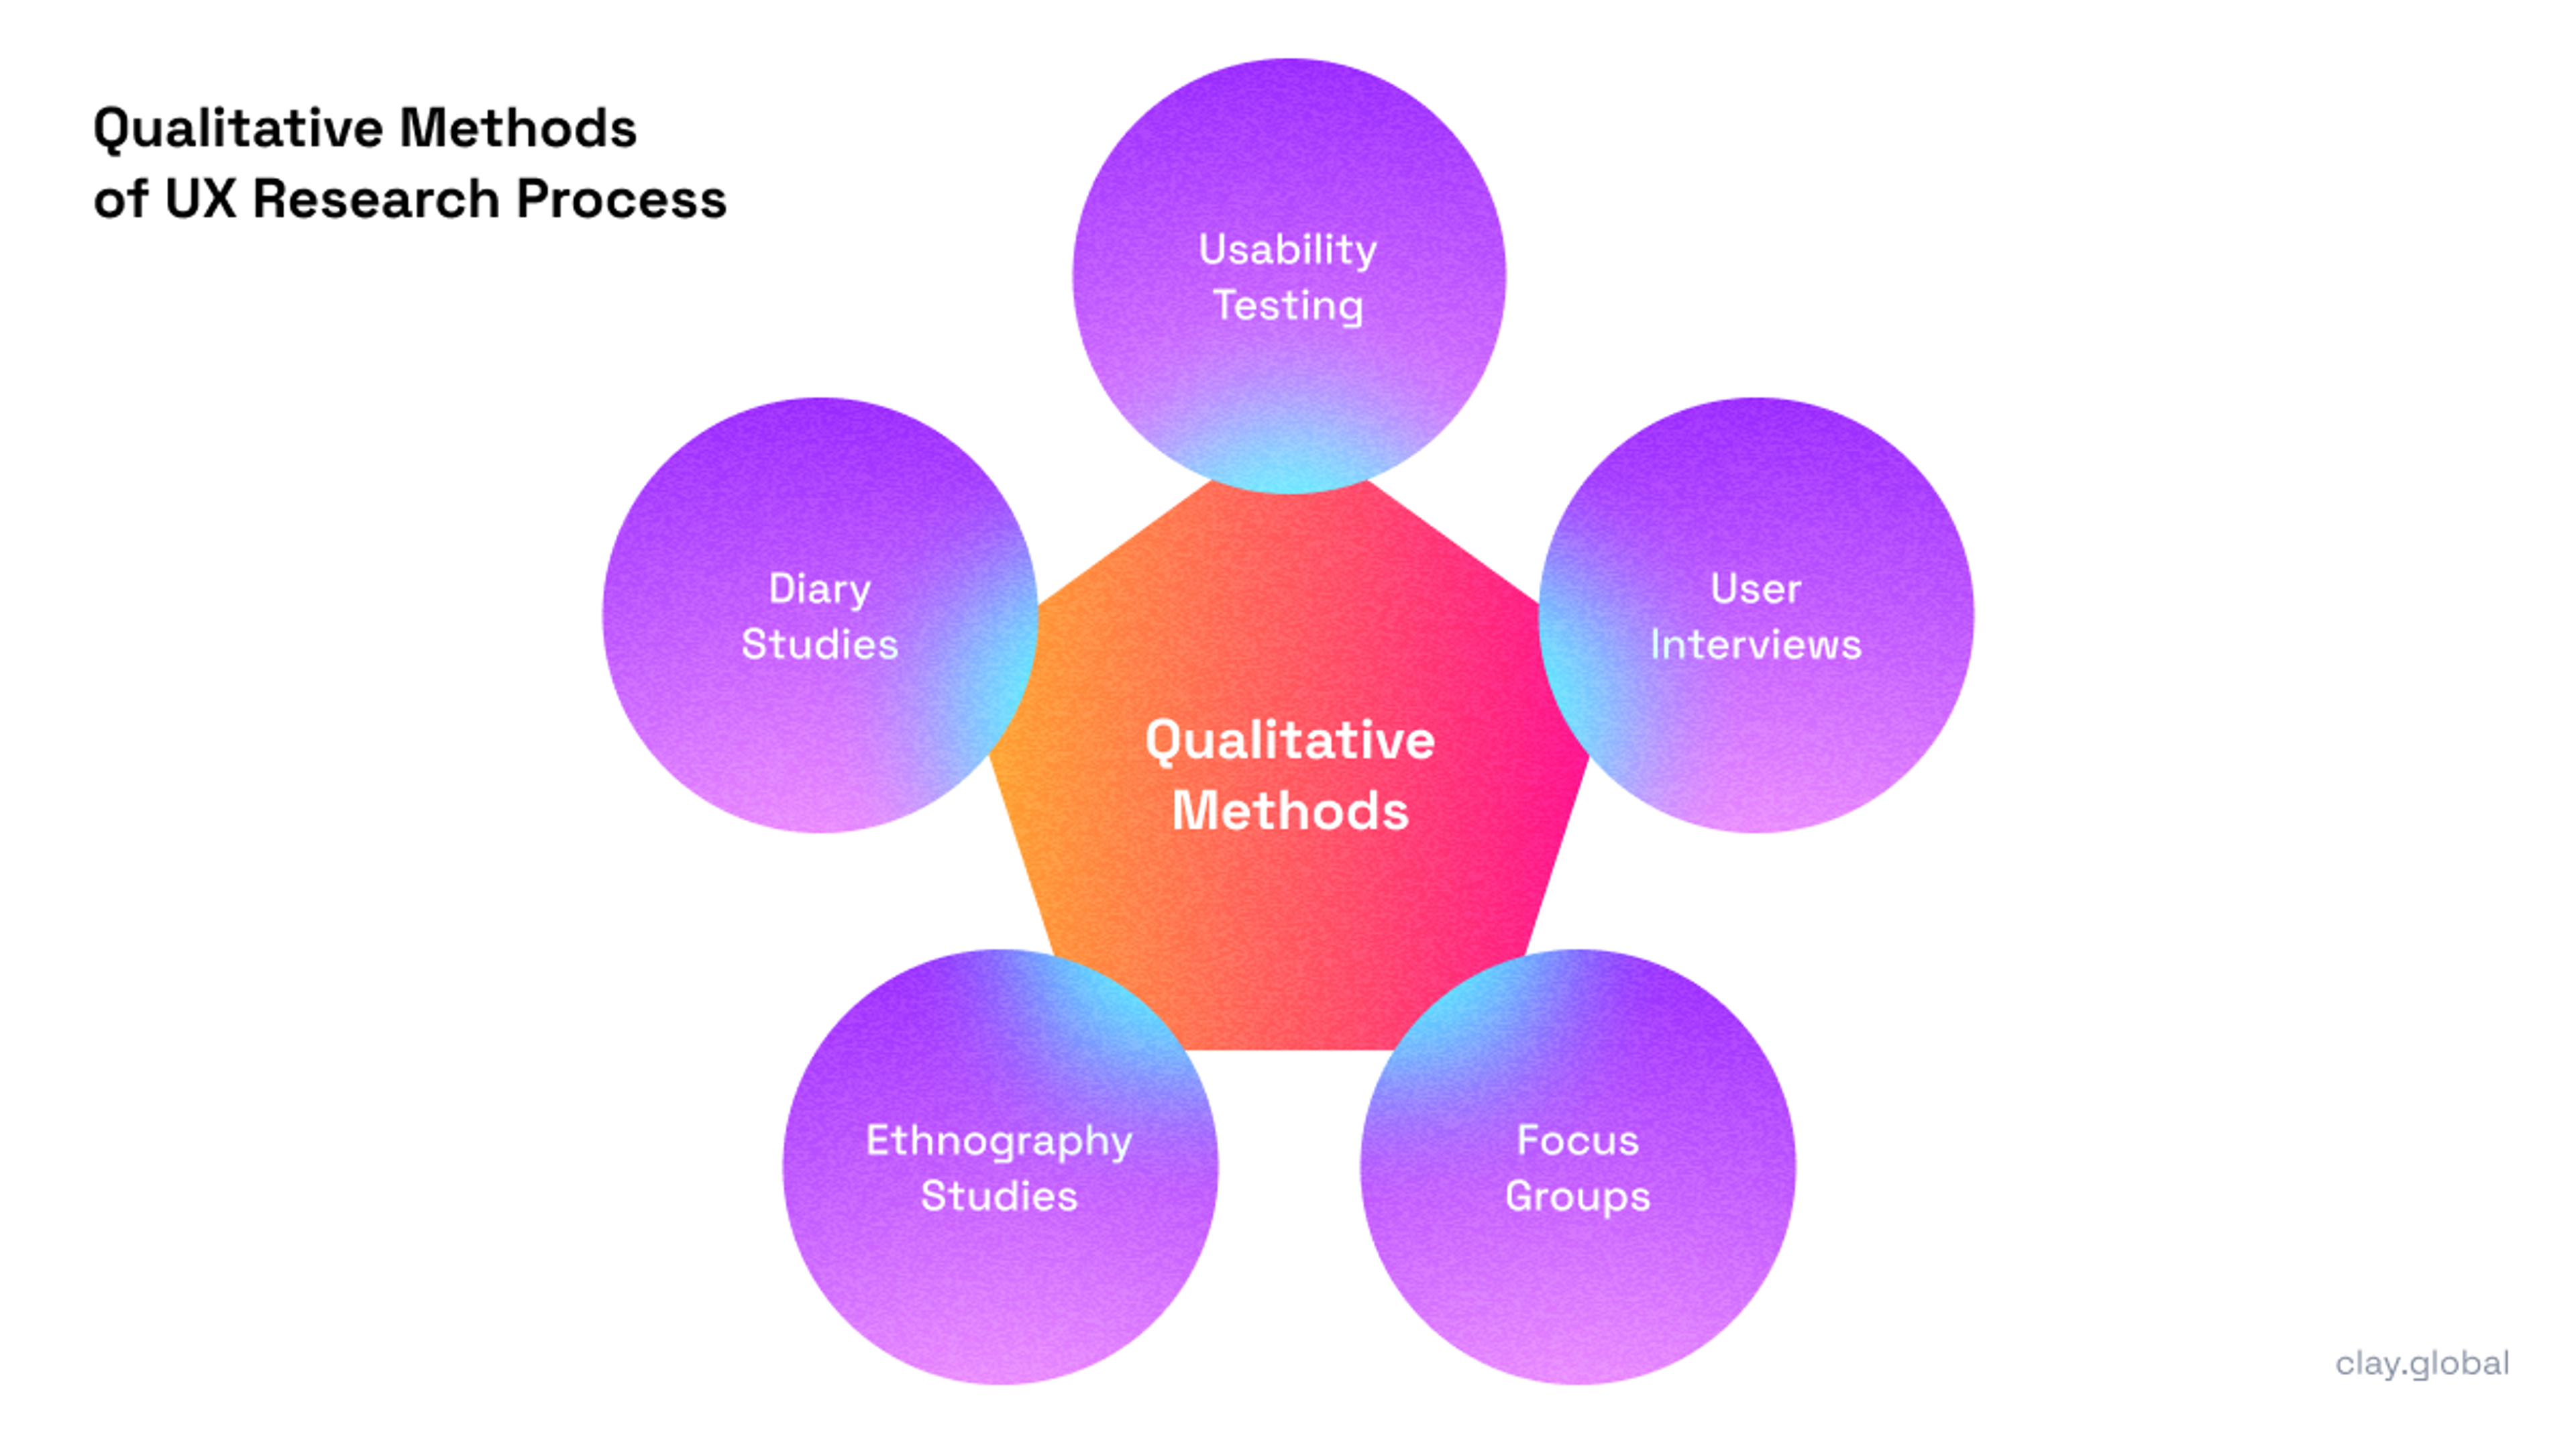 Qualitative Methods of UX Research Process